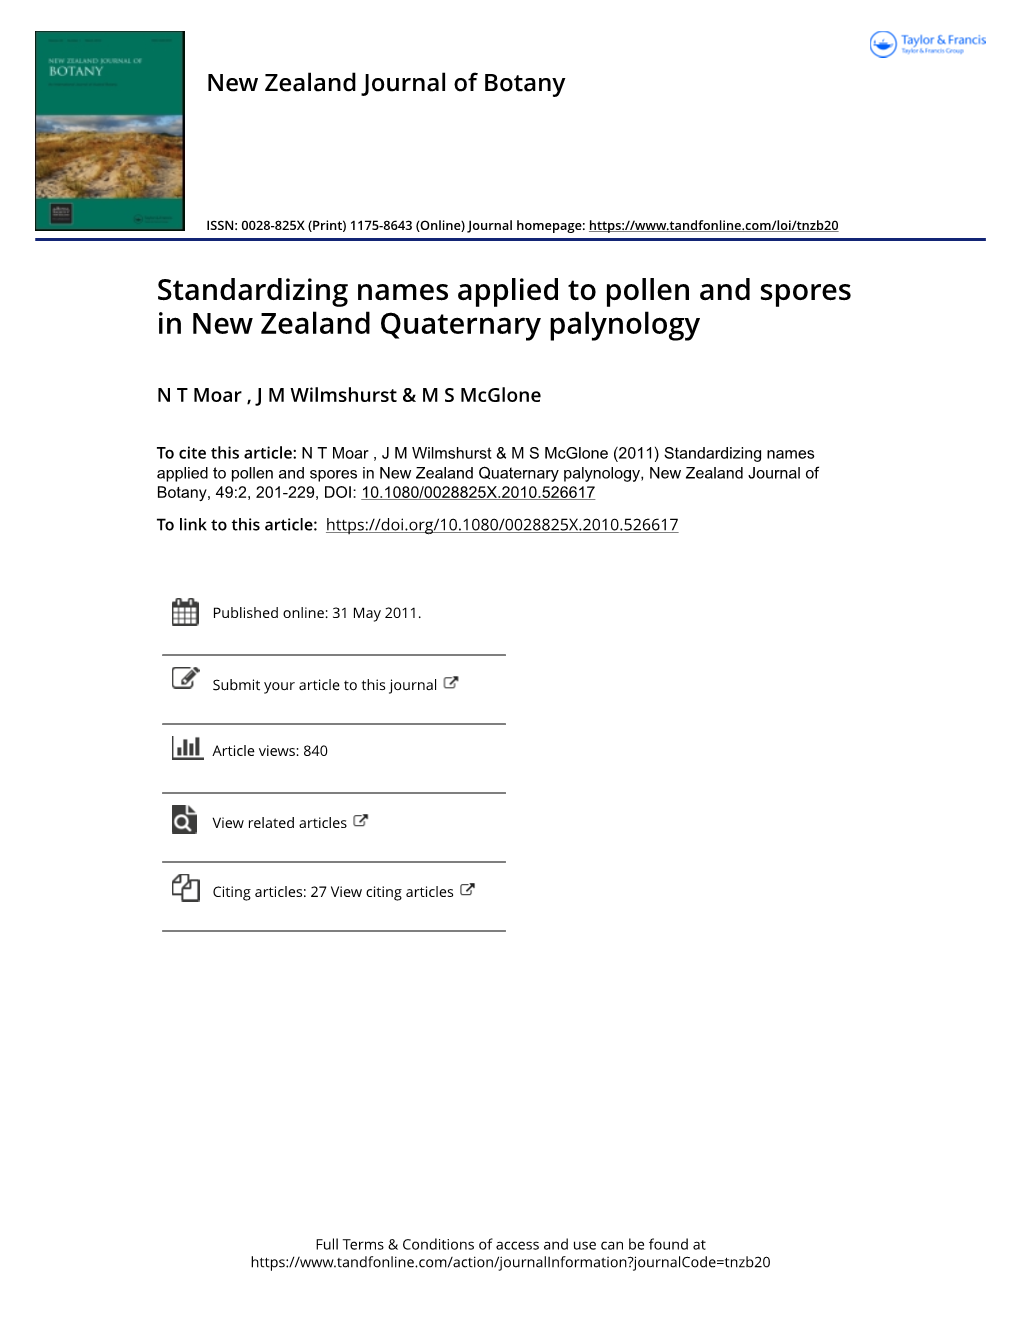 Standardizing Names Applied to Pollen and Spores in New Zealand Quaternary Palynology